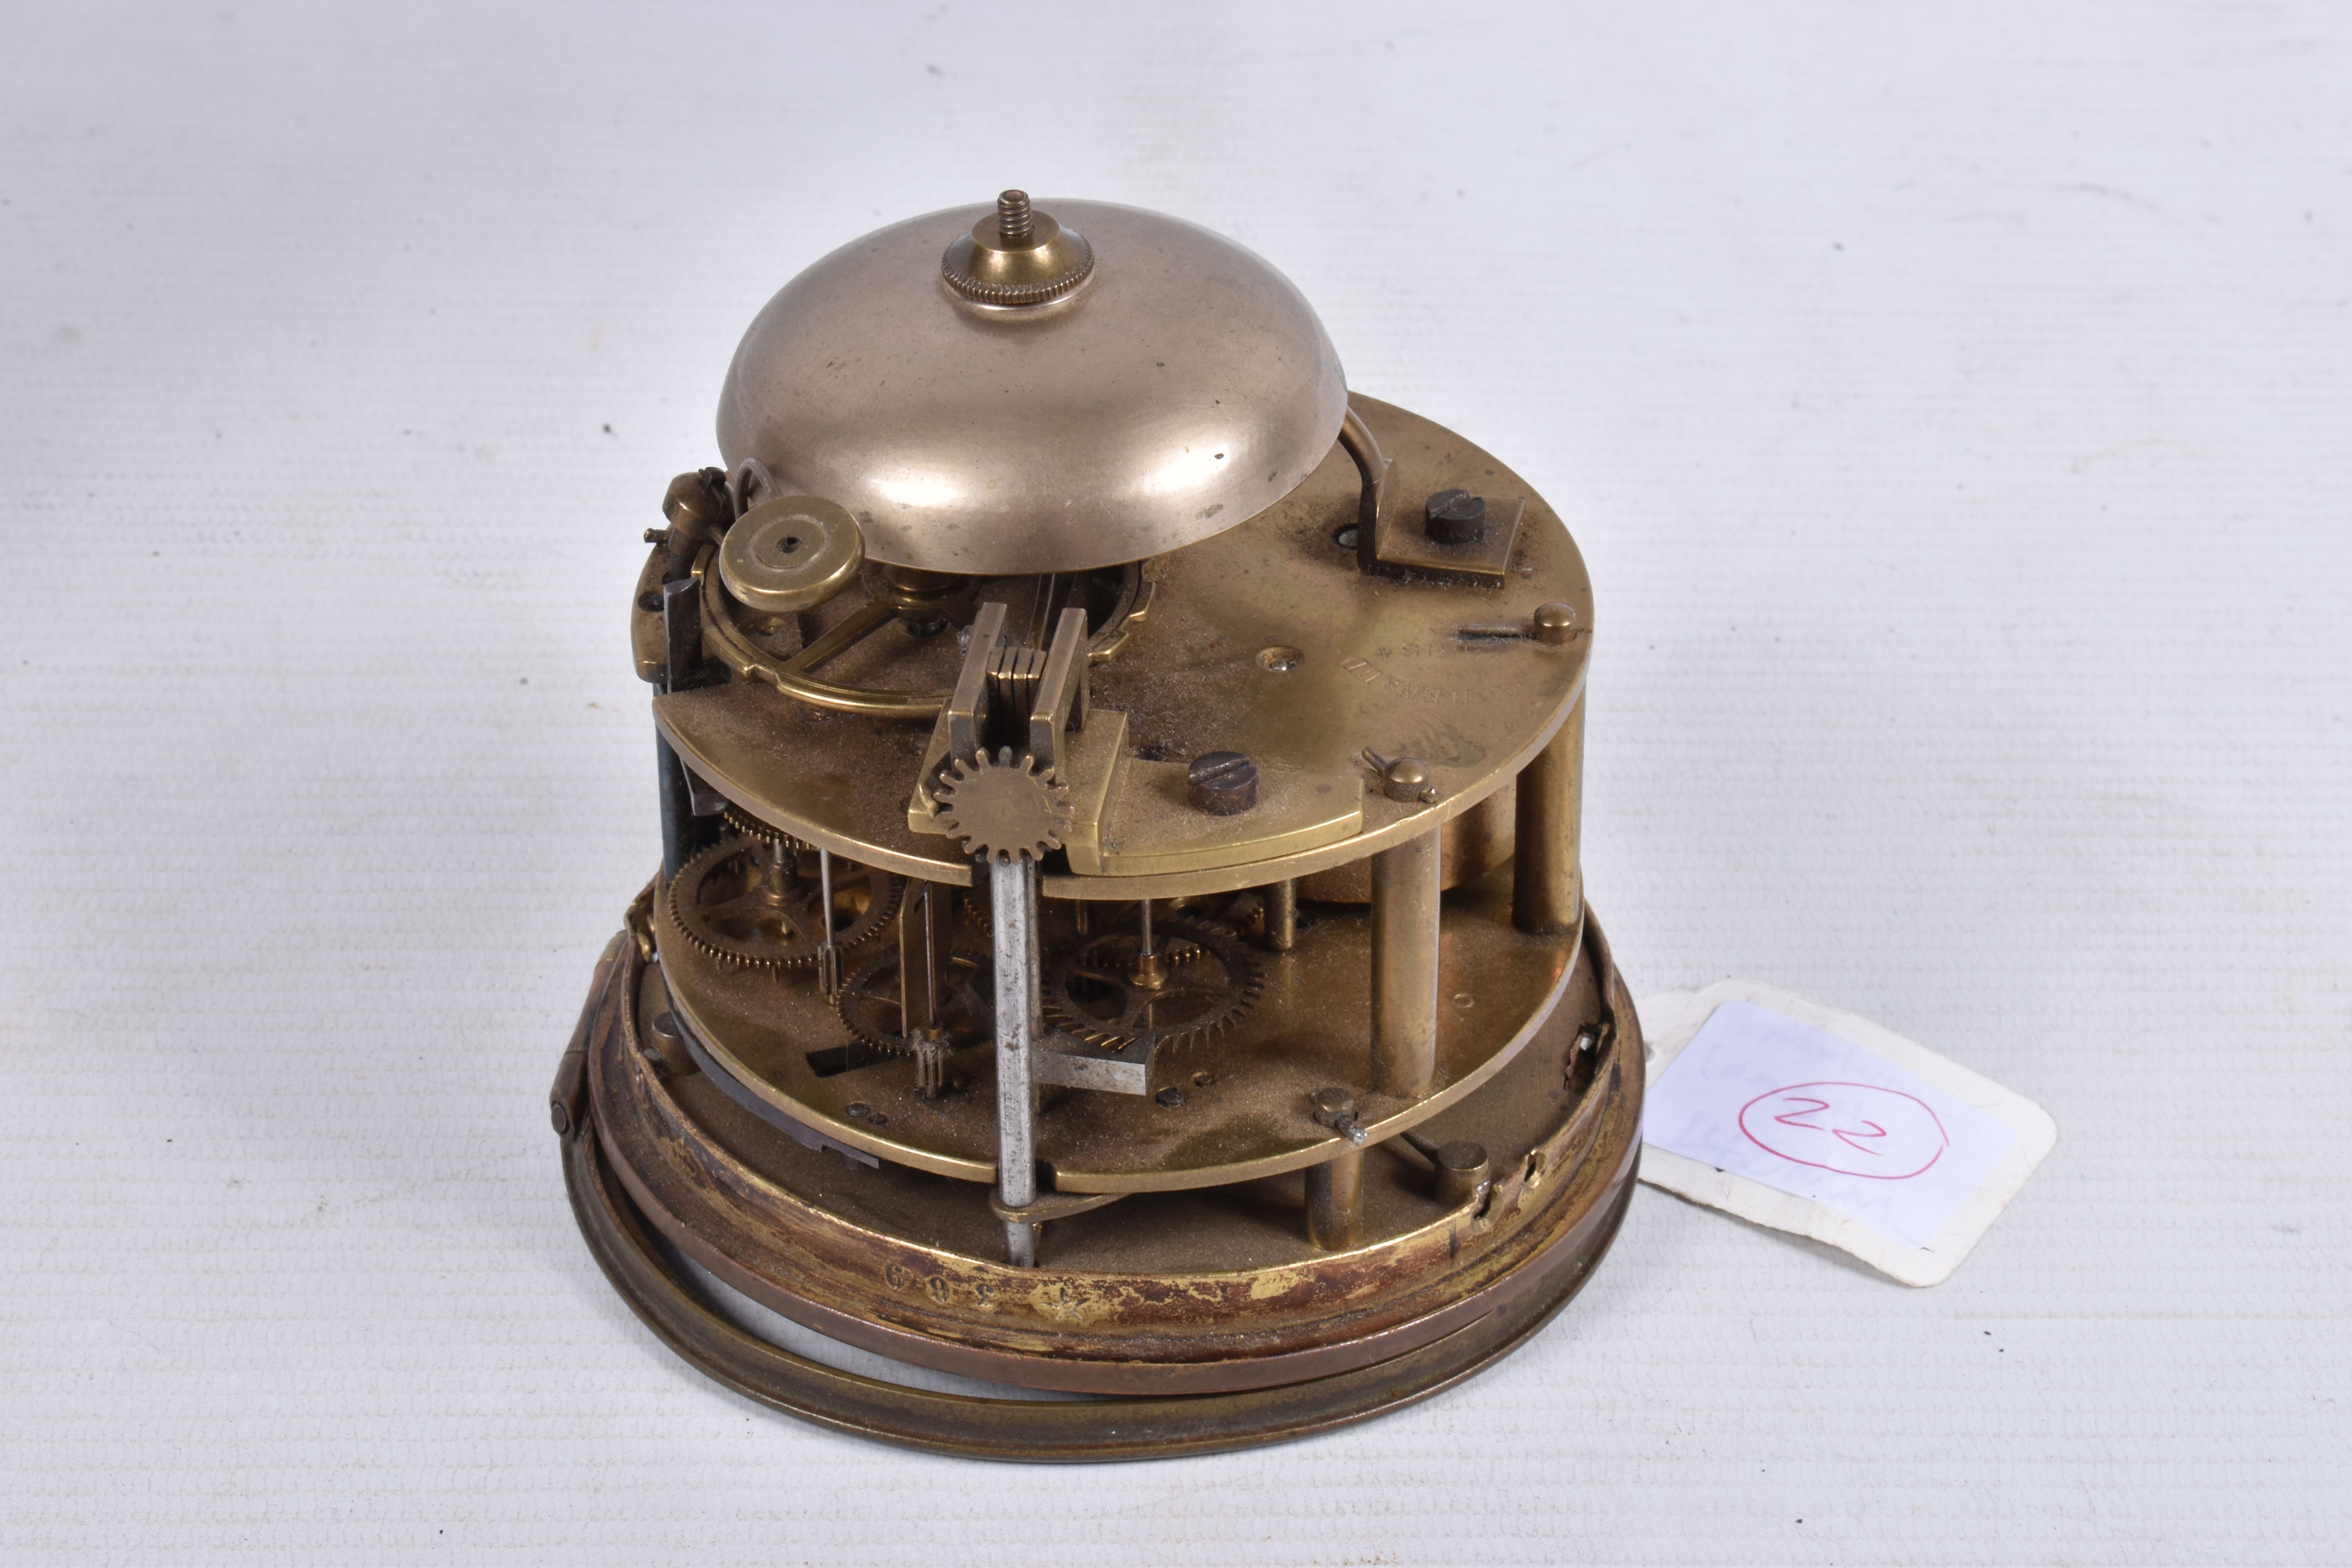 A TRENCH ART MANTLE CLOCK FORMED FROM A BOMB CASING, 19th century movement free from the case, - Image 3 of 11